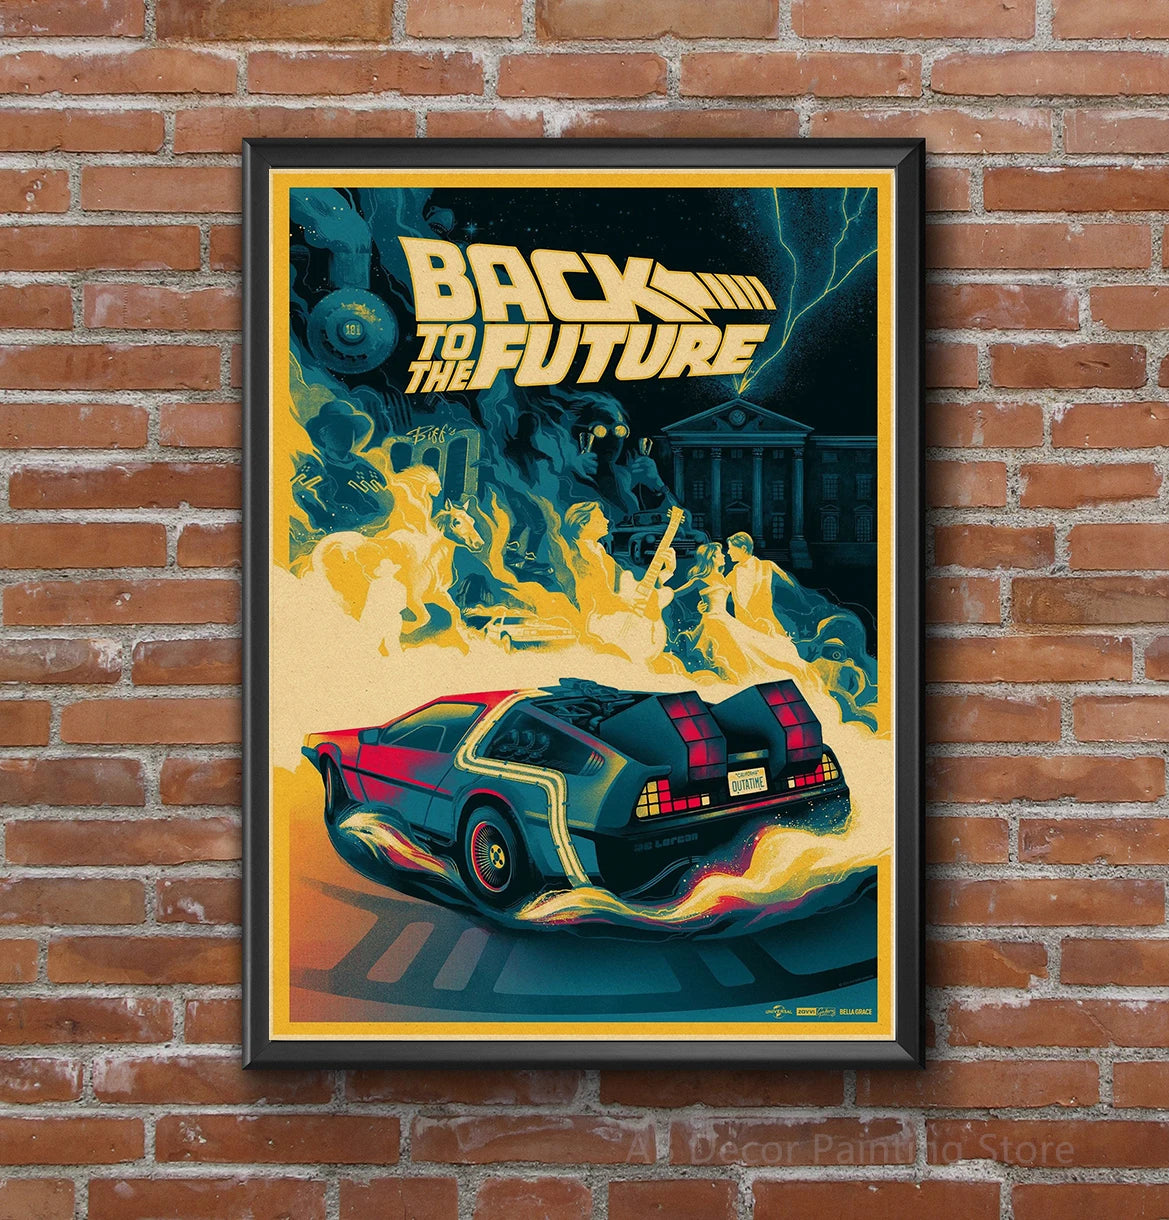 Back To The Future Trilogy Movie Posters: Vintage Kraft Paper Prints for Home, Cafe, and Bar Wall Decor